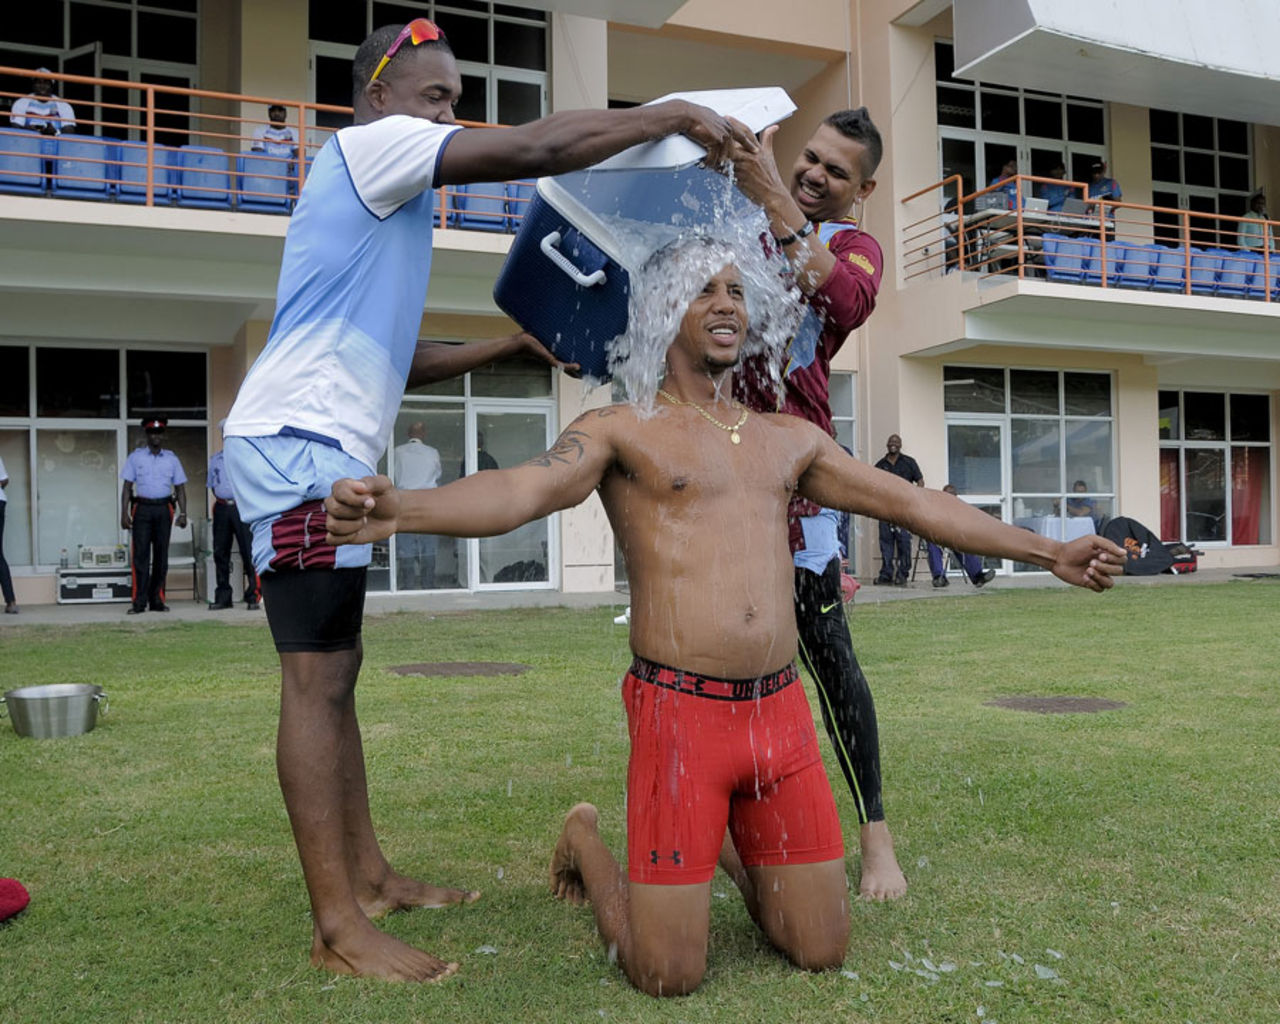 Lendl Simmons takes the Ice Bucket Challenge, St George's, August 20, 2014